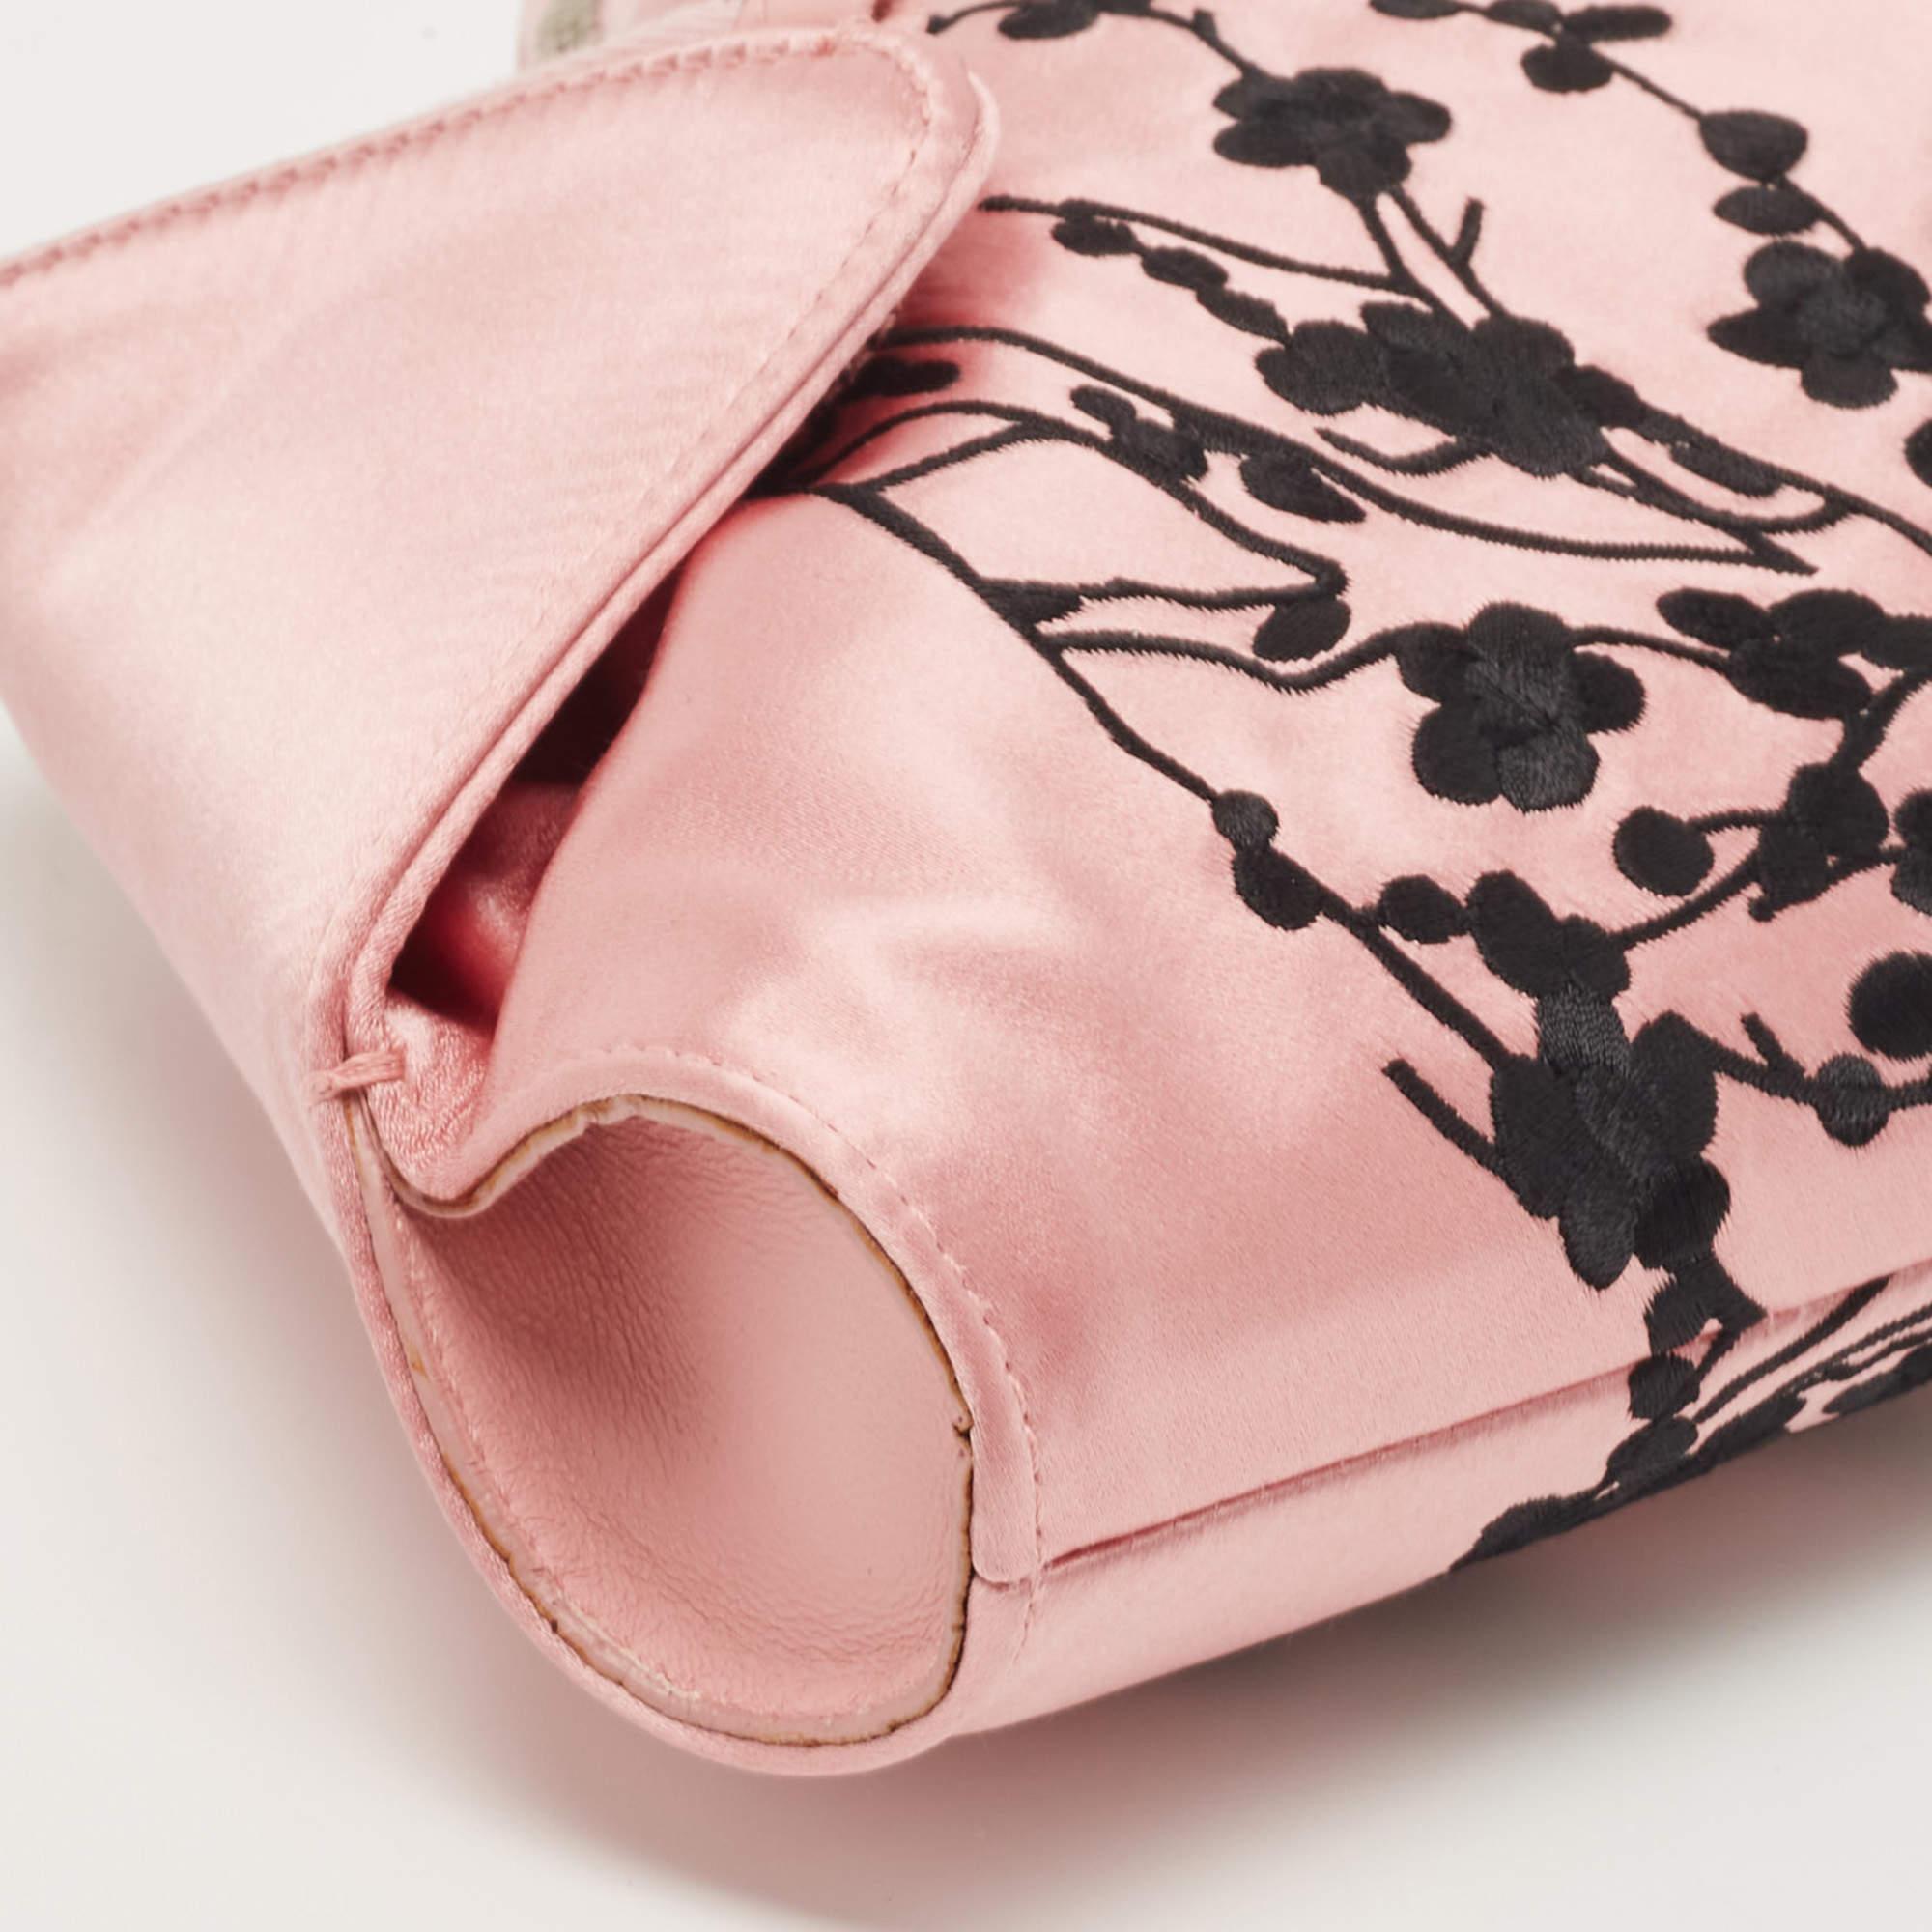 Alexander McQueen Pink/Black Embroidered Satin and Leather De Manta Clutch 3